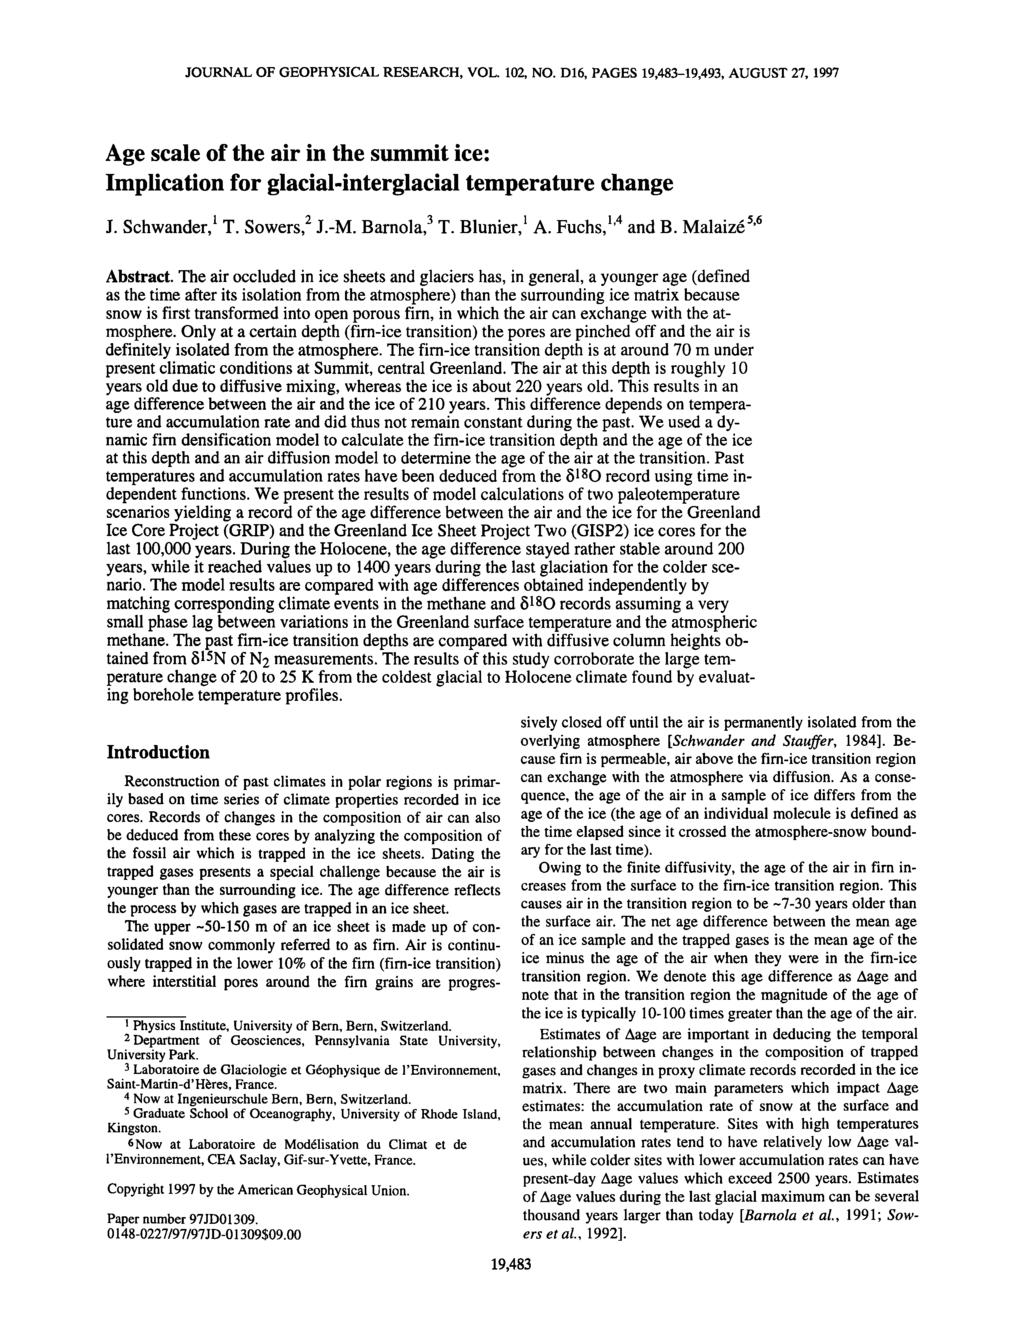 JOURNAL OF GEOPHYSICAL RESEARCH, VOL. 102, NO. D16, PAGES 19,483-19,493, AUGUST 27, 1997 Age scale of the air in the summit ice: Implication for glacial-interglacial temperature change J.